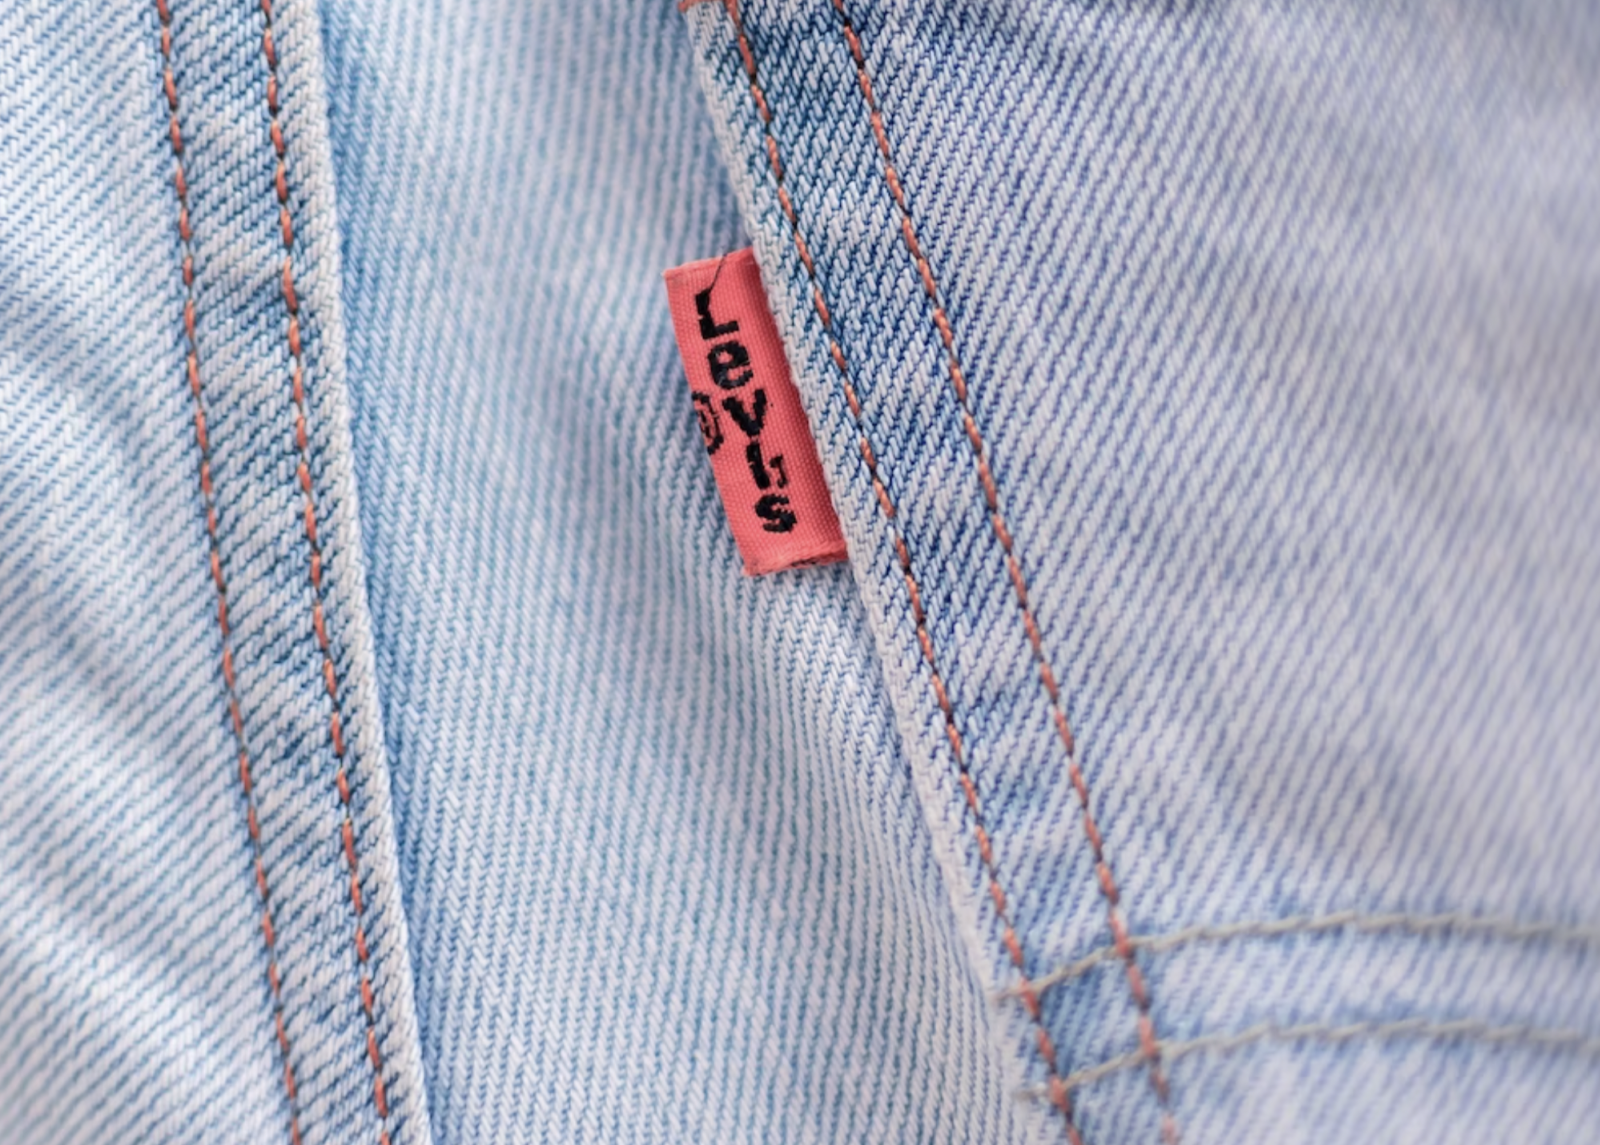 Levi's Takes on Hammies in Latest Tab Trademark Lawsuit